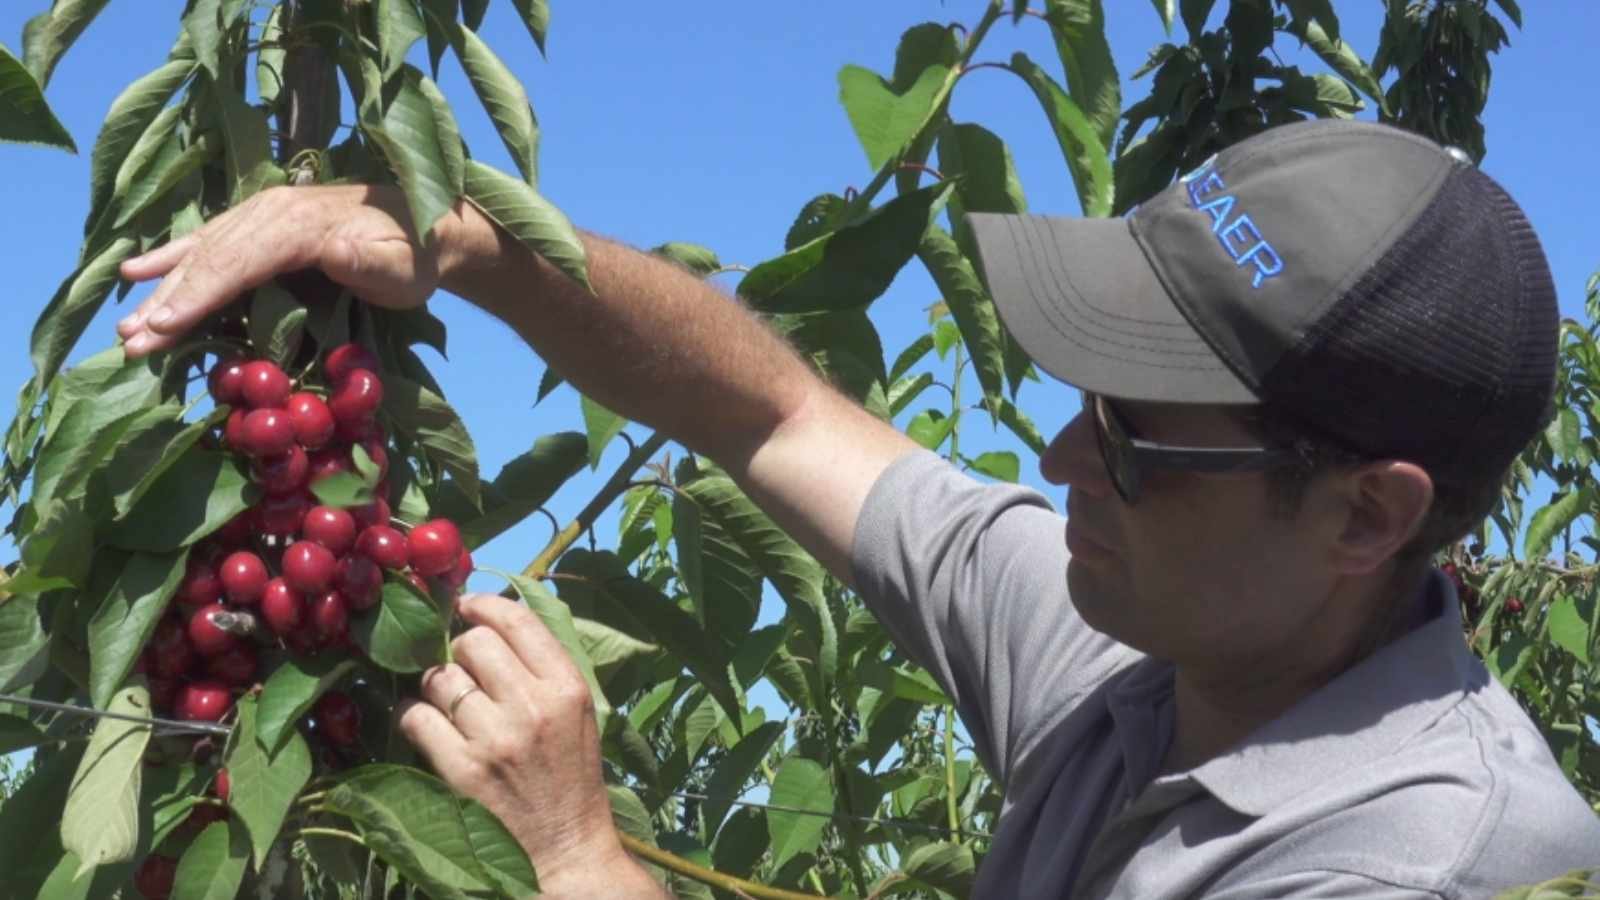 Cherry Farmer improves crops with nanobubbles for regenerative agriculture